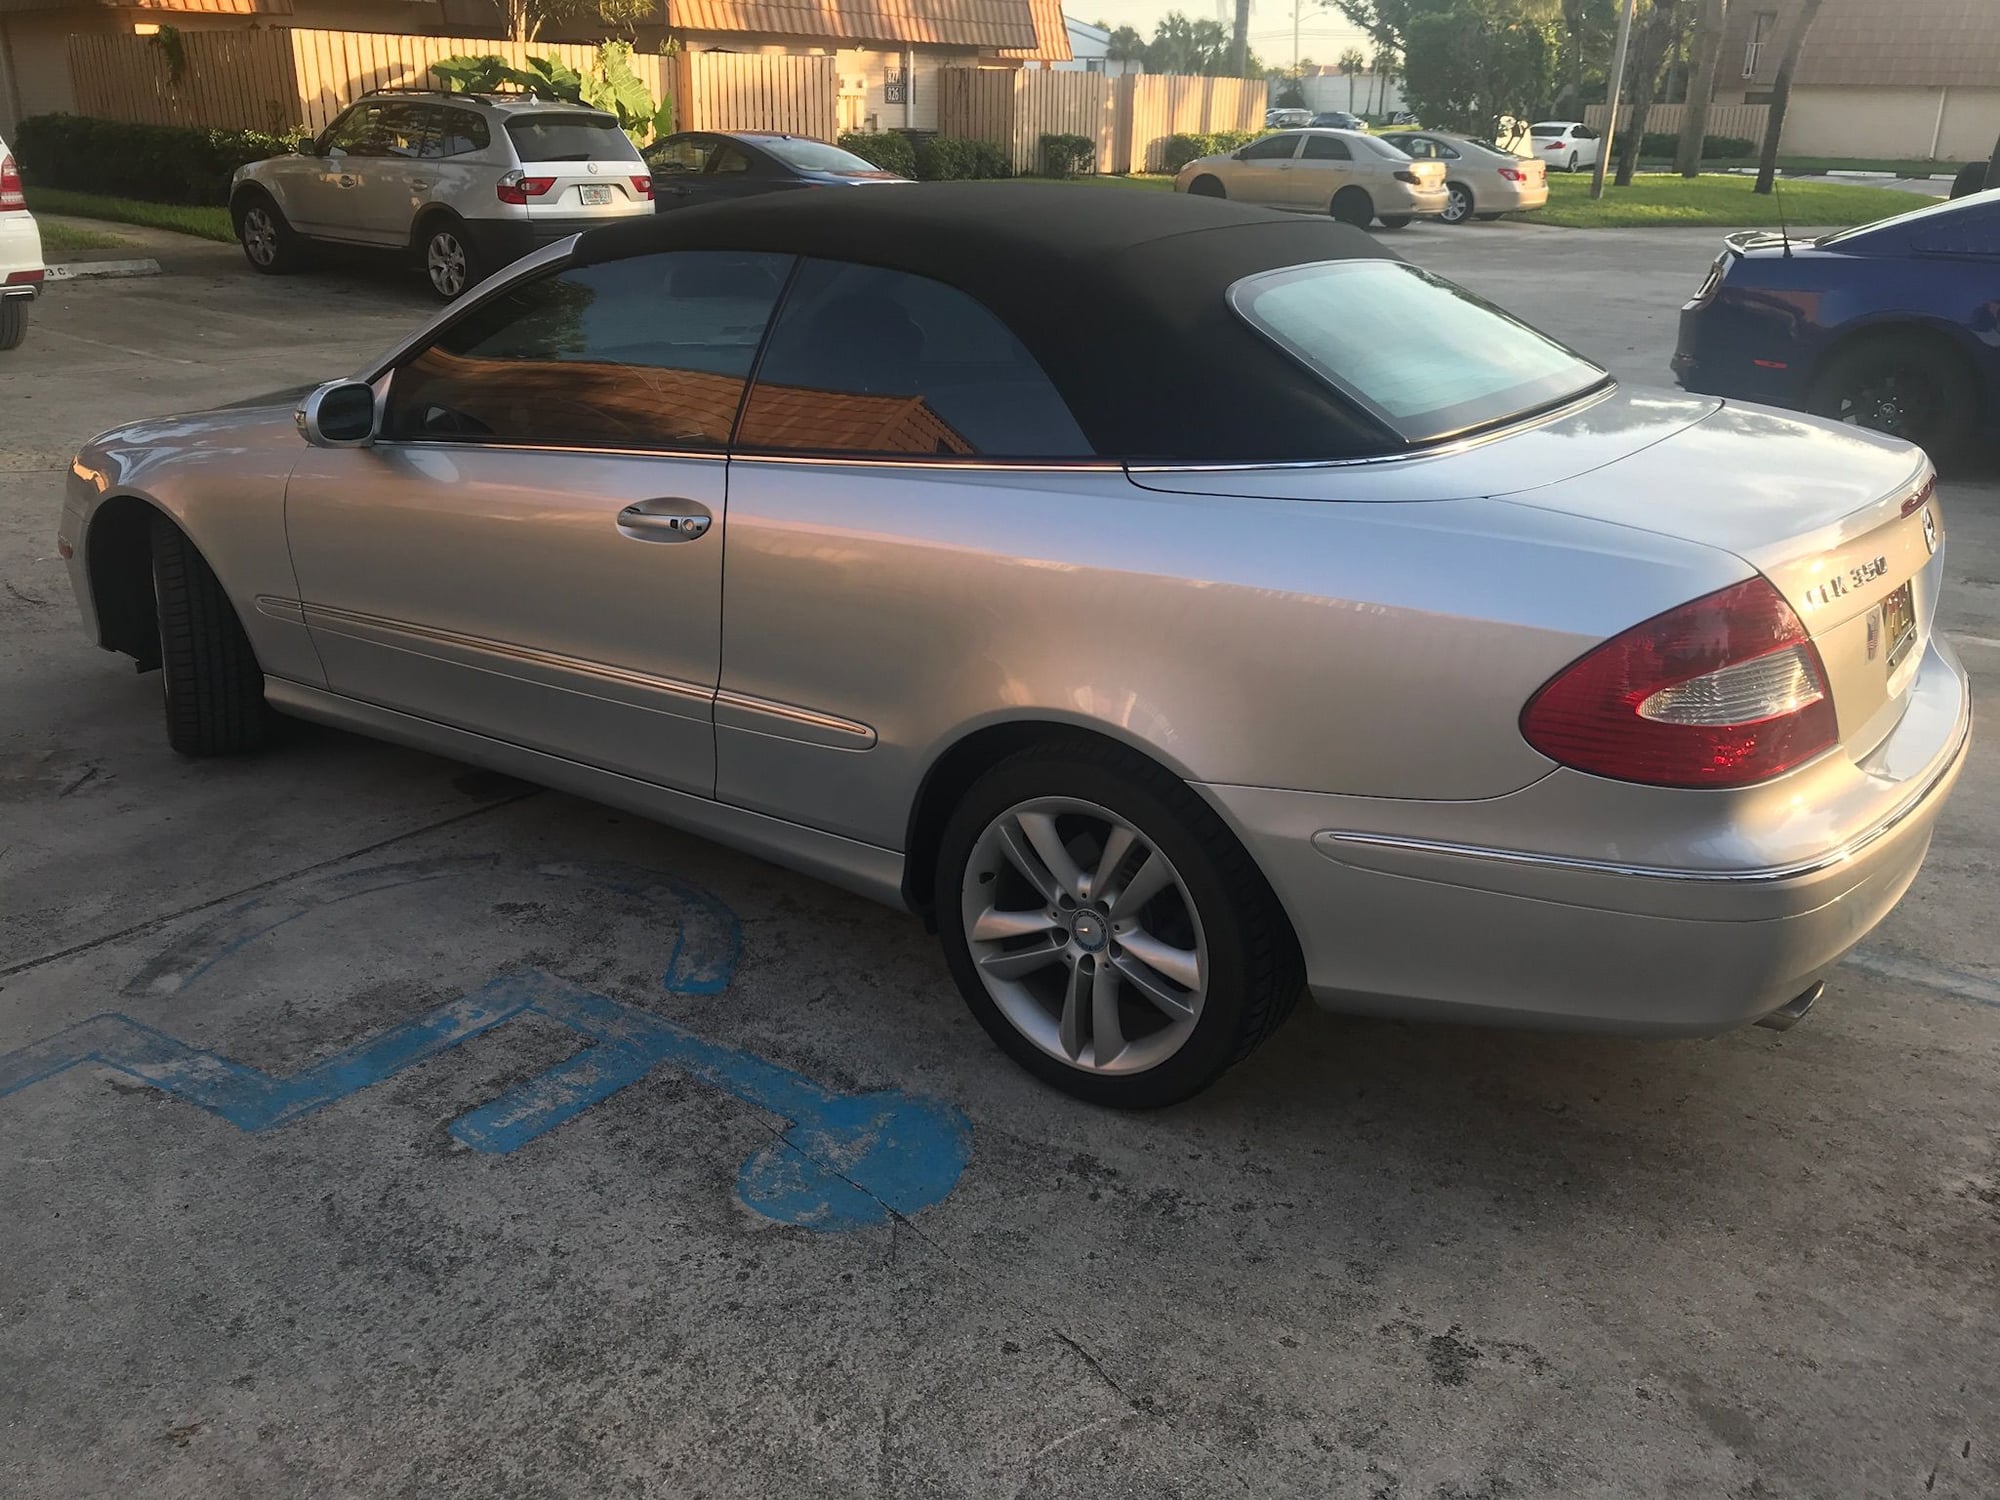 2006 Mercedes-Benz CLK350 - Well cared for and maintained convertible, premium 3, fully optioned. - Used - VIN wdbtk56g86t063569 - 64,000 Miles - 6 cyl - 2WD - Automatic - Convertible - Silver - West Palm Beach, FL 33409, United States